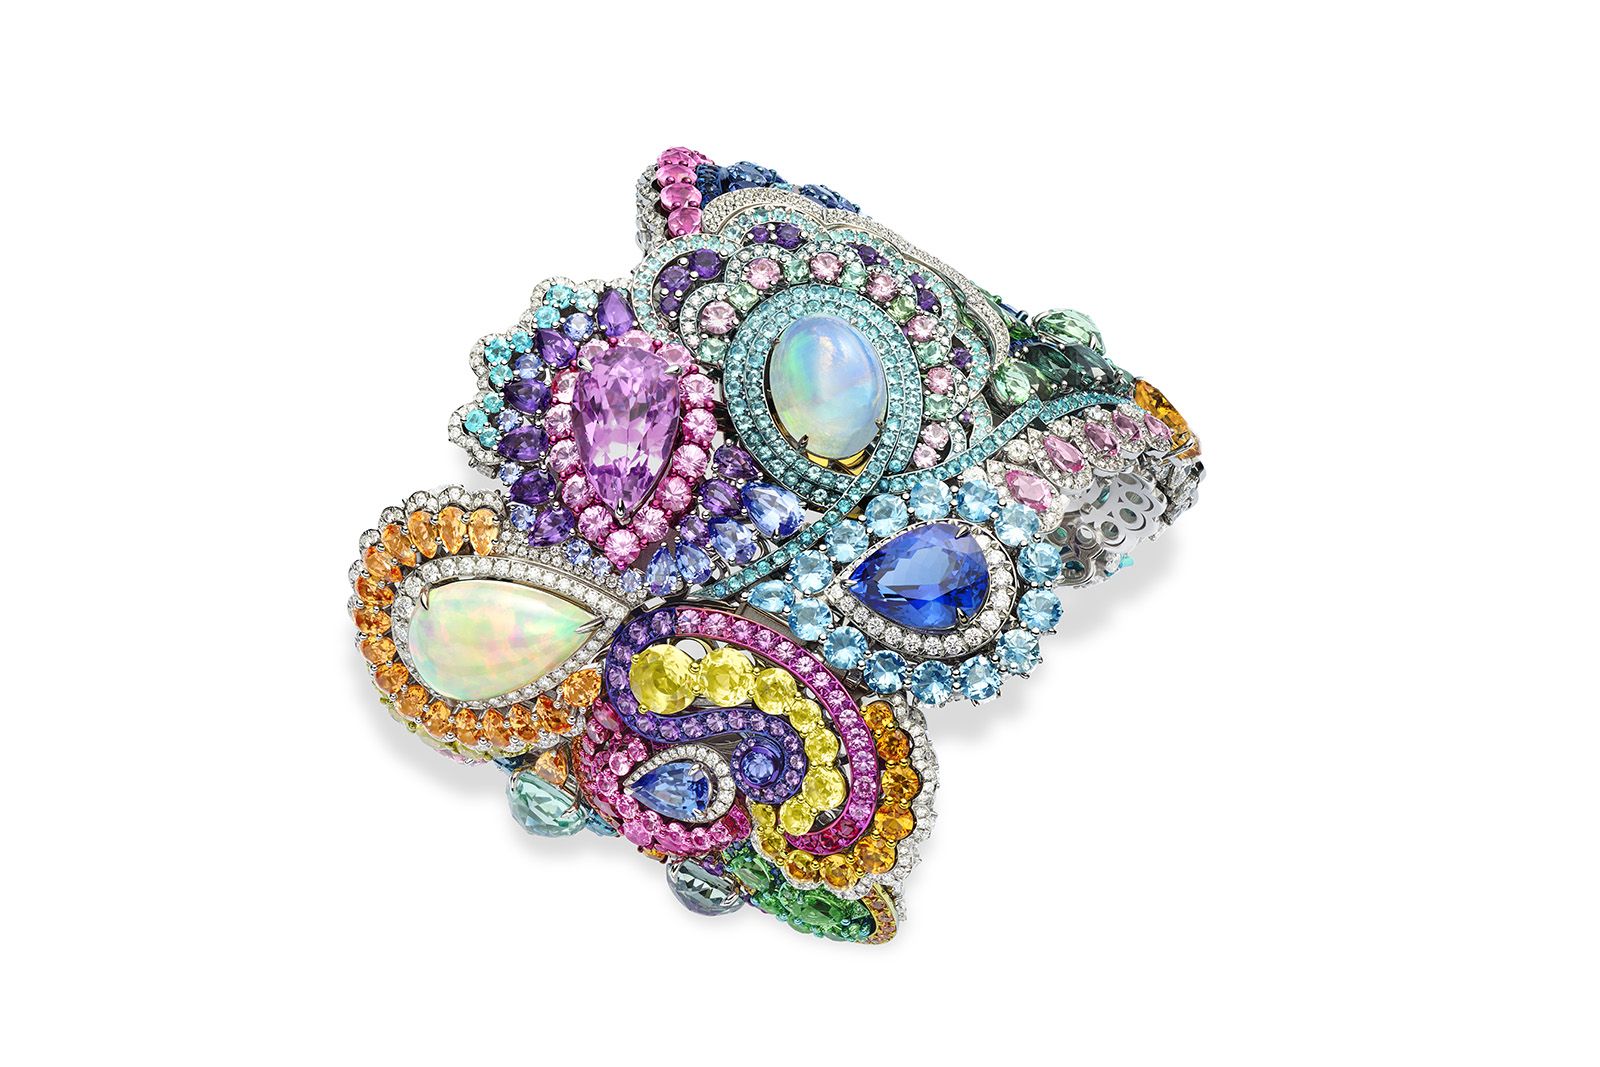 Chopard cuff bracelet from The Red Carpet collection in ethical Fairmined-certified 18k white gold, titanium and silver set with 61.90 carats of tsavorites, 27.72 carats of pastel sapphires, tourmalines, tanzanites, diamonds, white opals, kunzite, amethysts, Mandarin garnets, aquamarines, Paraiba tourmalines, beryls, pink quartz, topaz, citrines and rubies 